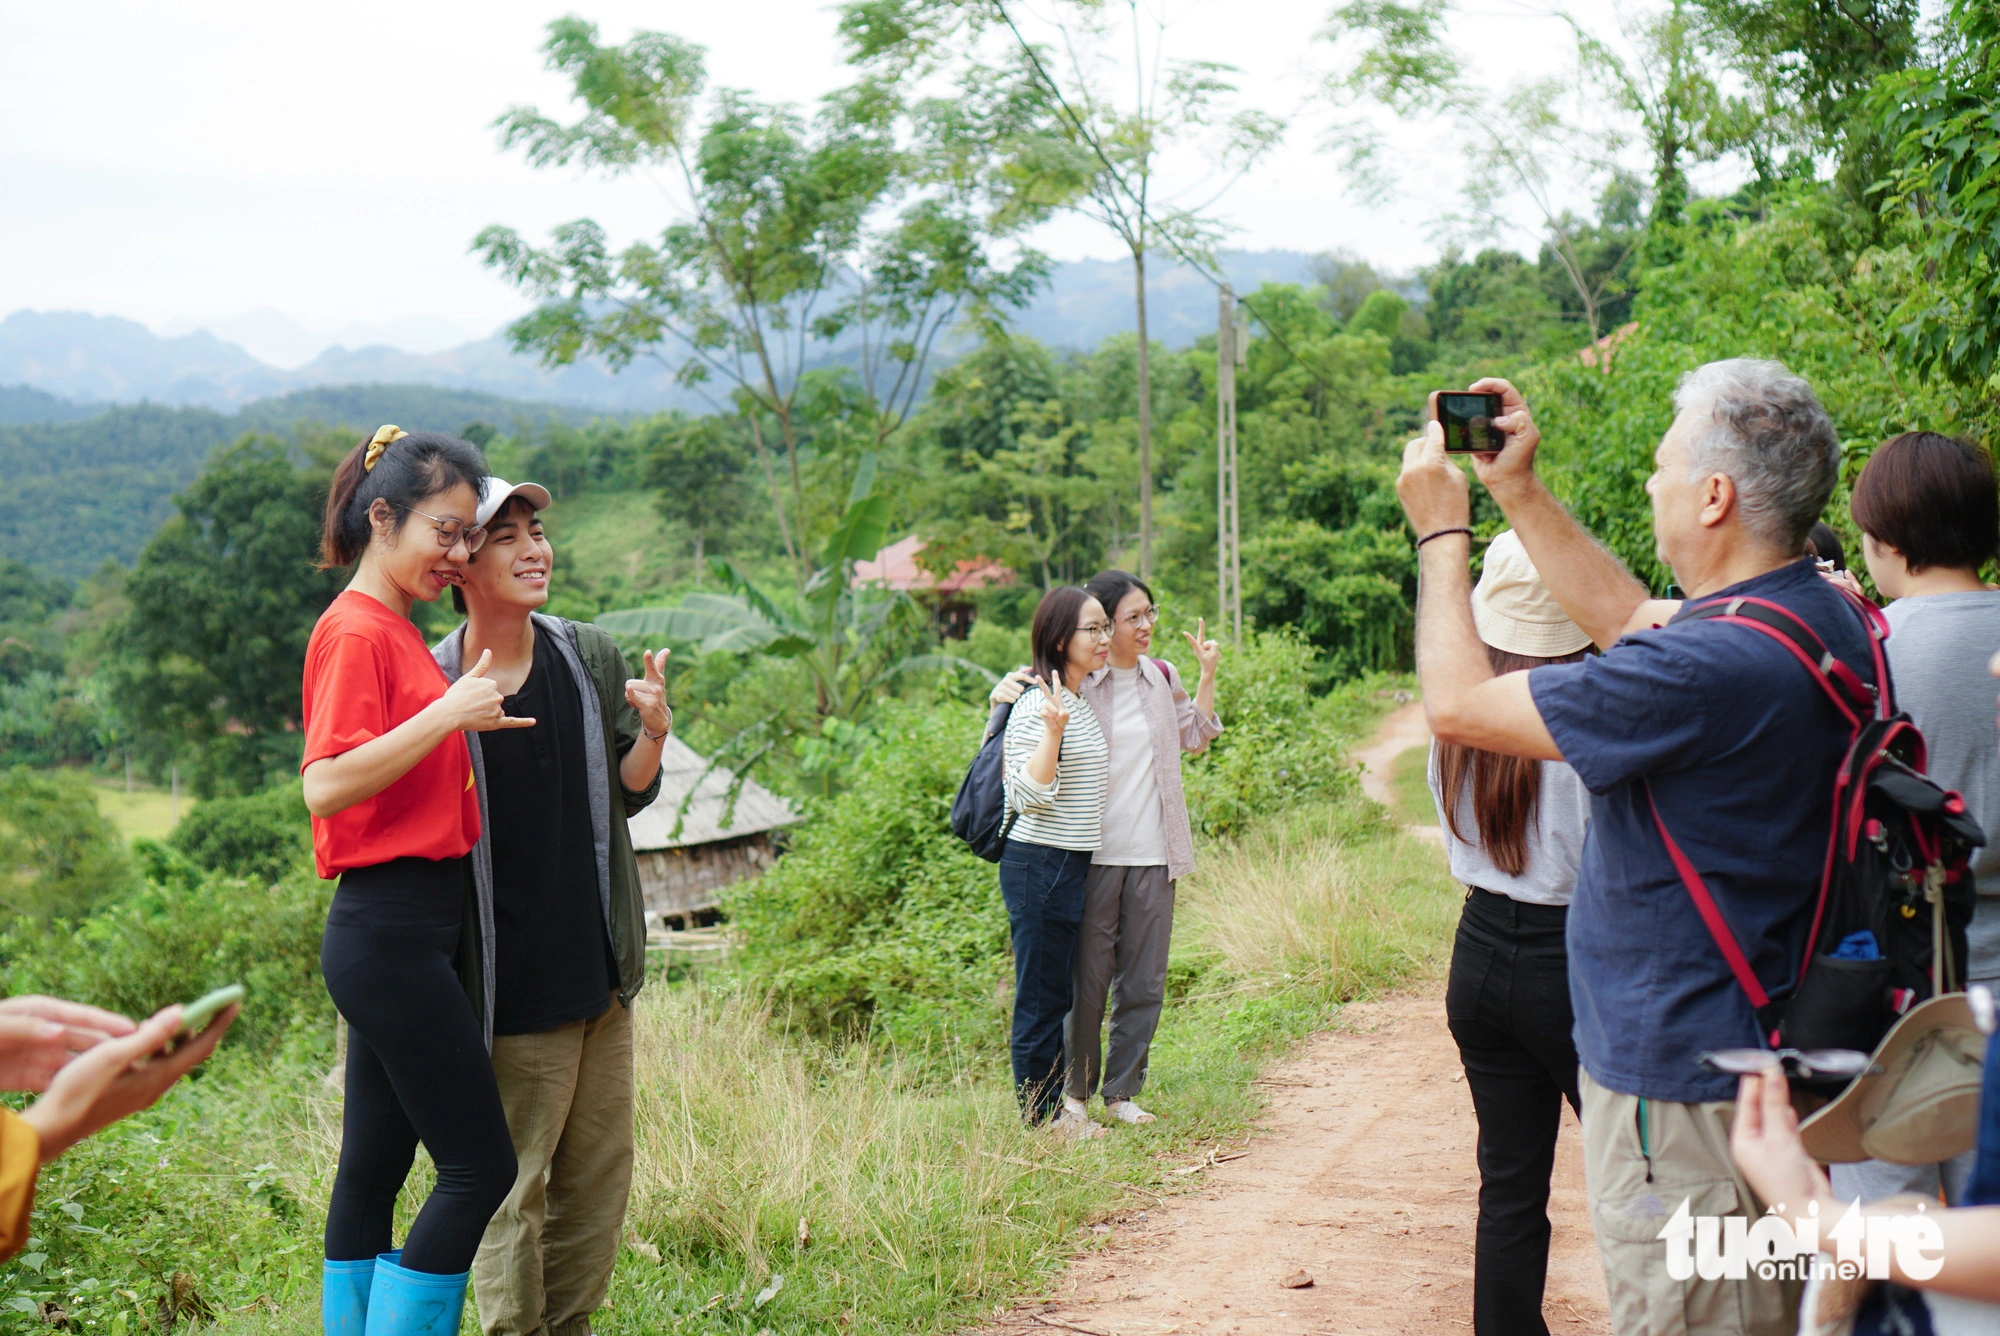 Tourists take photos on the way to the rice fields. Photo: Nguyen Hien / Tuoi Tre